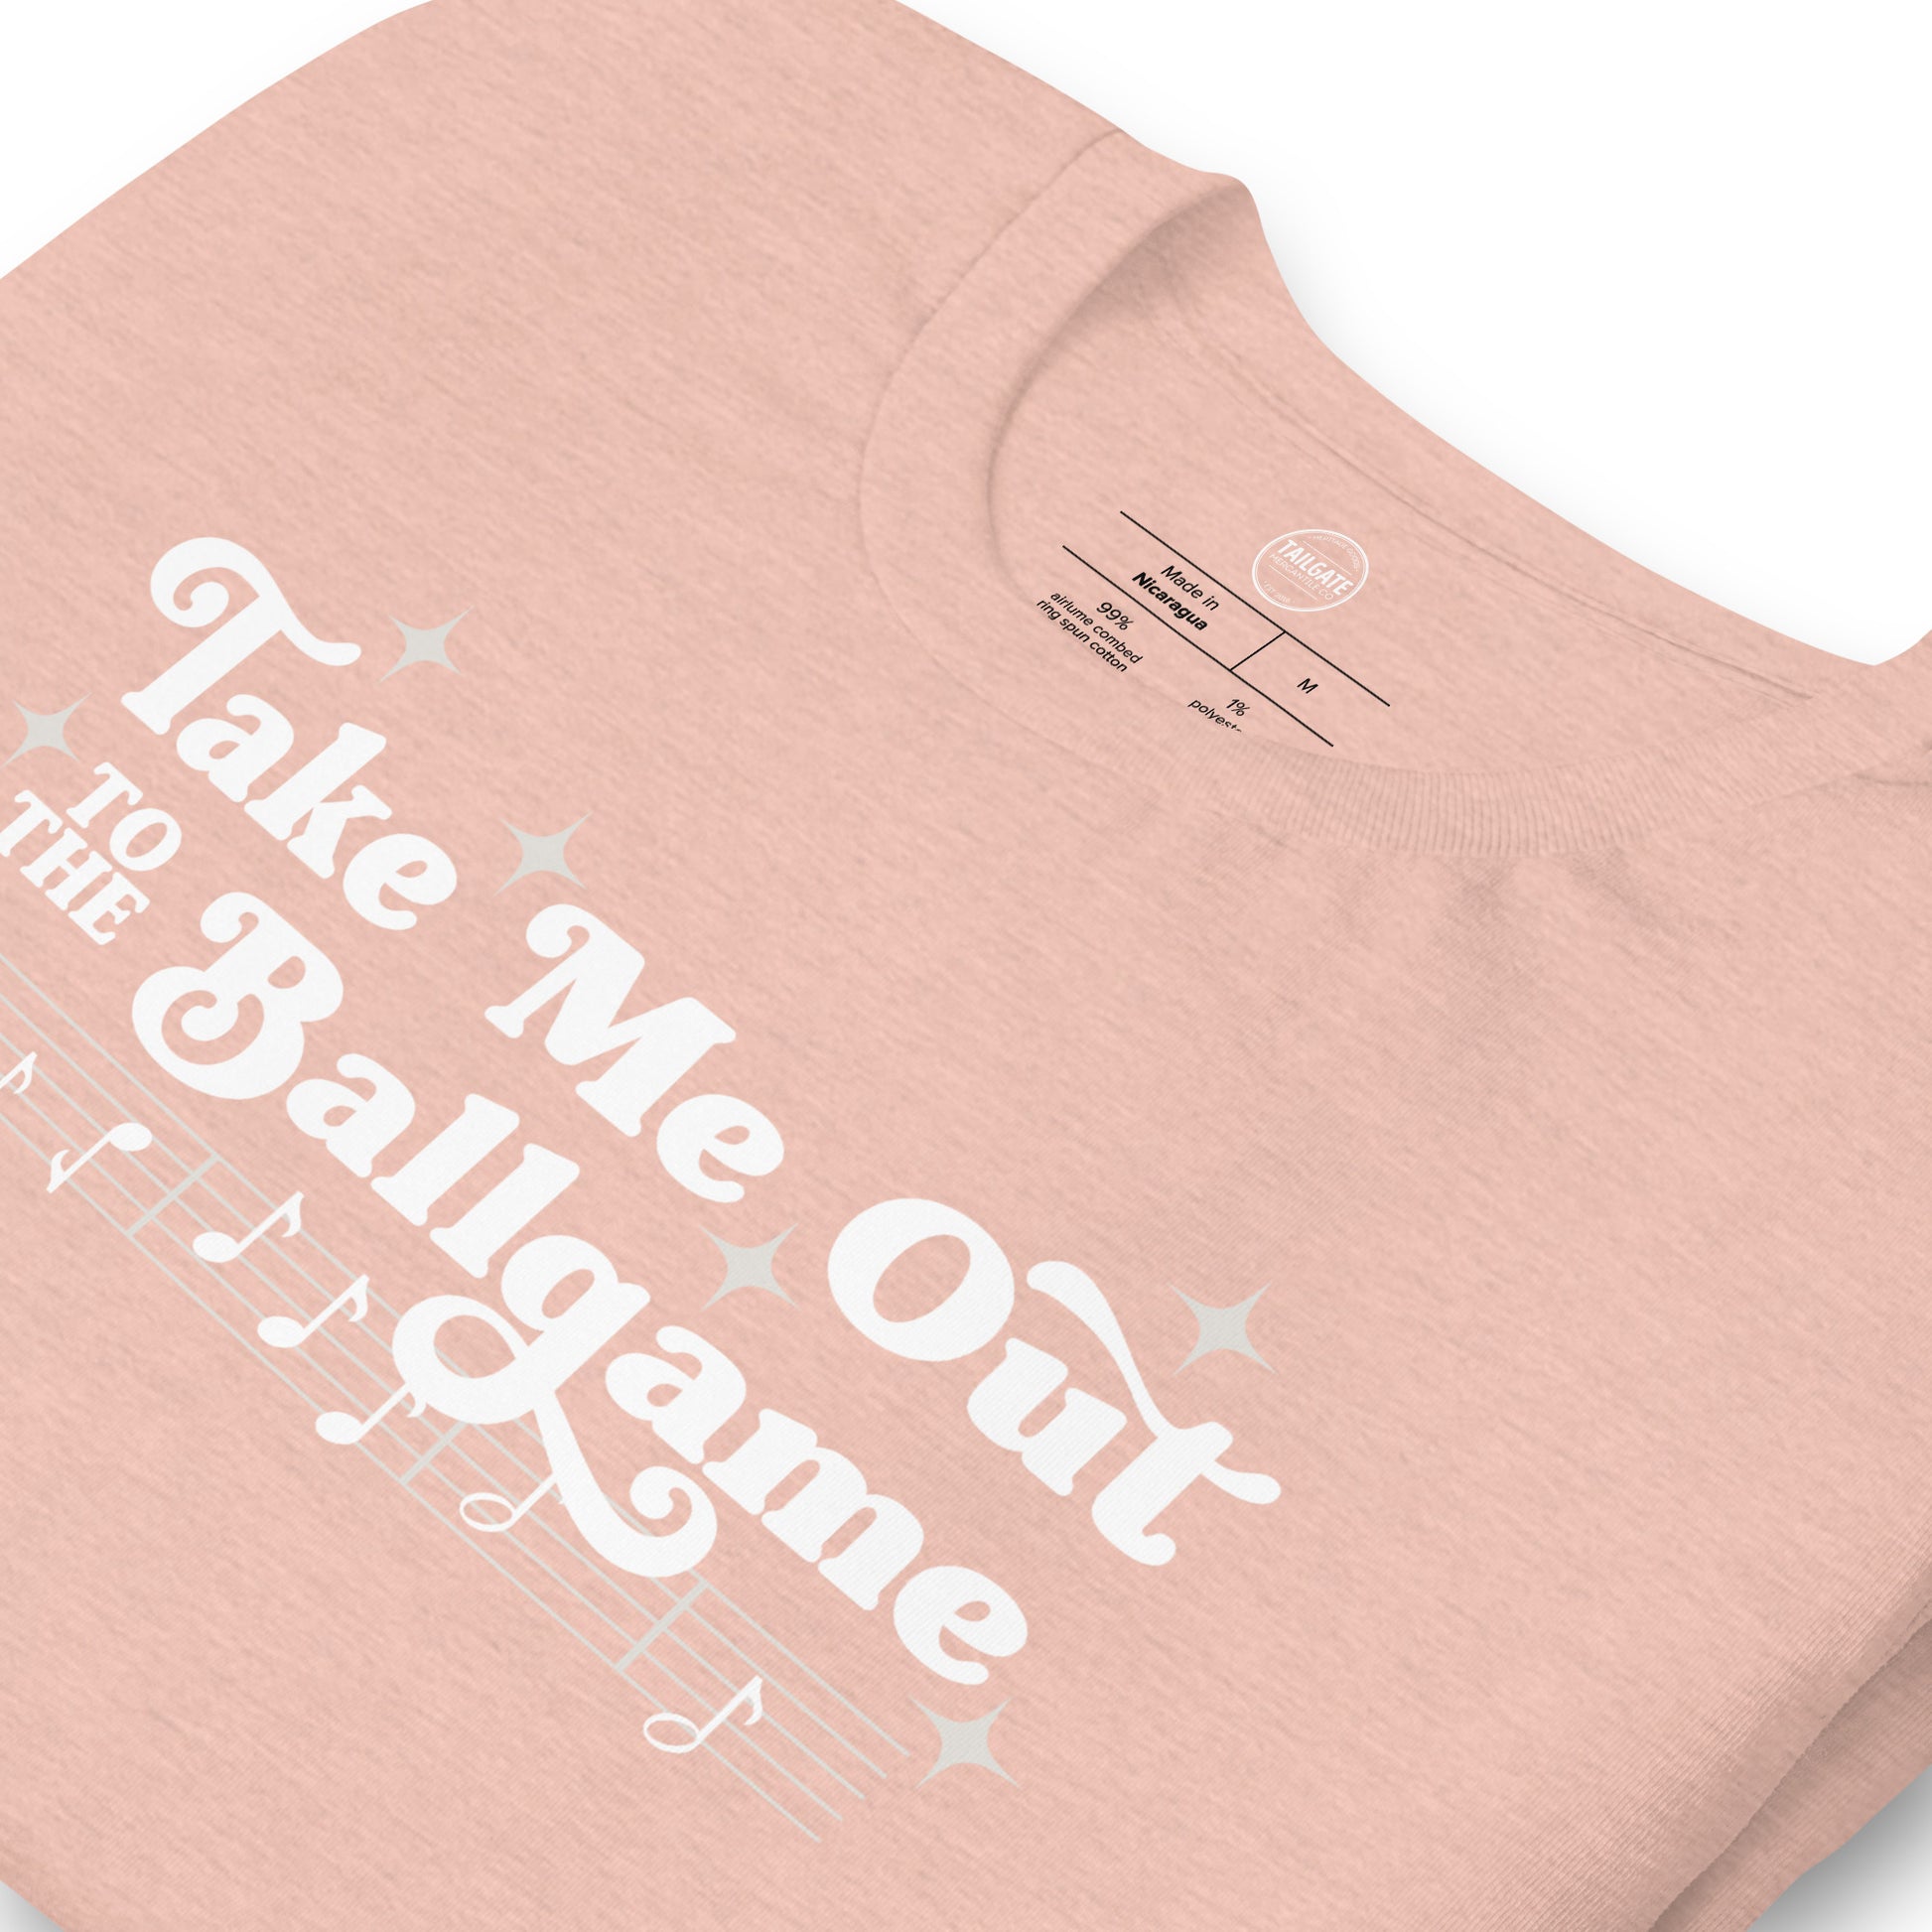 Close up image of heather peach t-shirt with design of "Take Me Out to the Ballgame" with coordinating musical notes in white located on centre chest. This design is exclusive to Tailgate Mercantile and available only online.